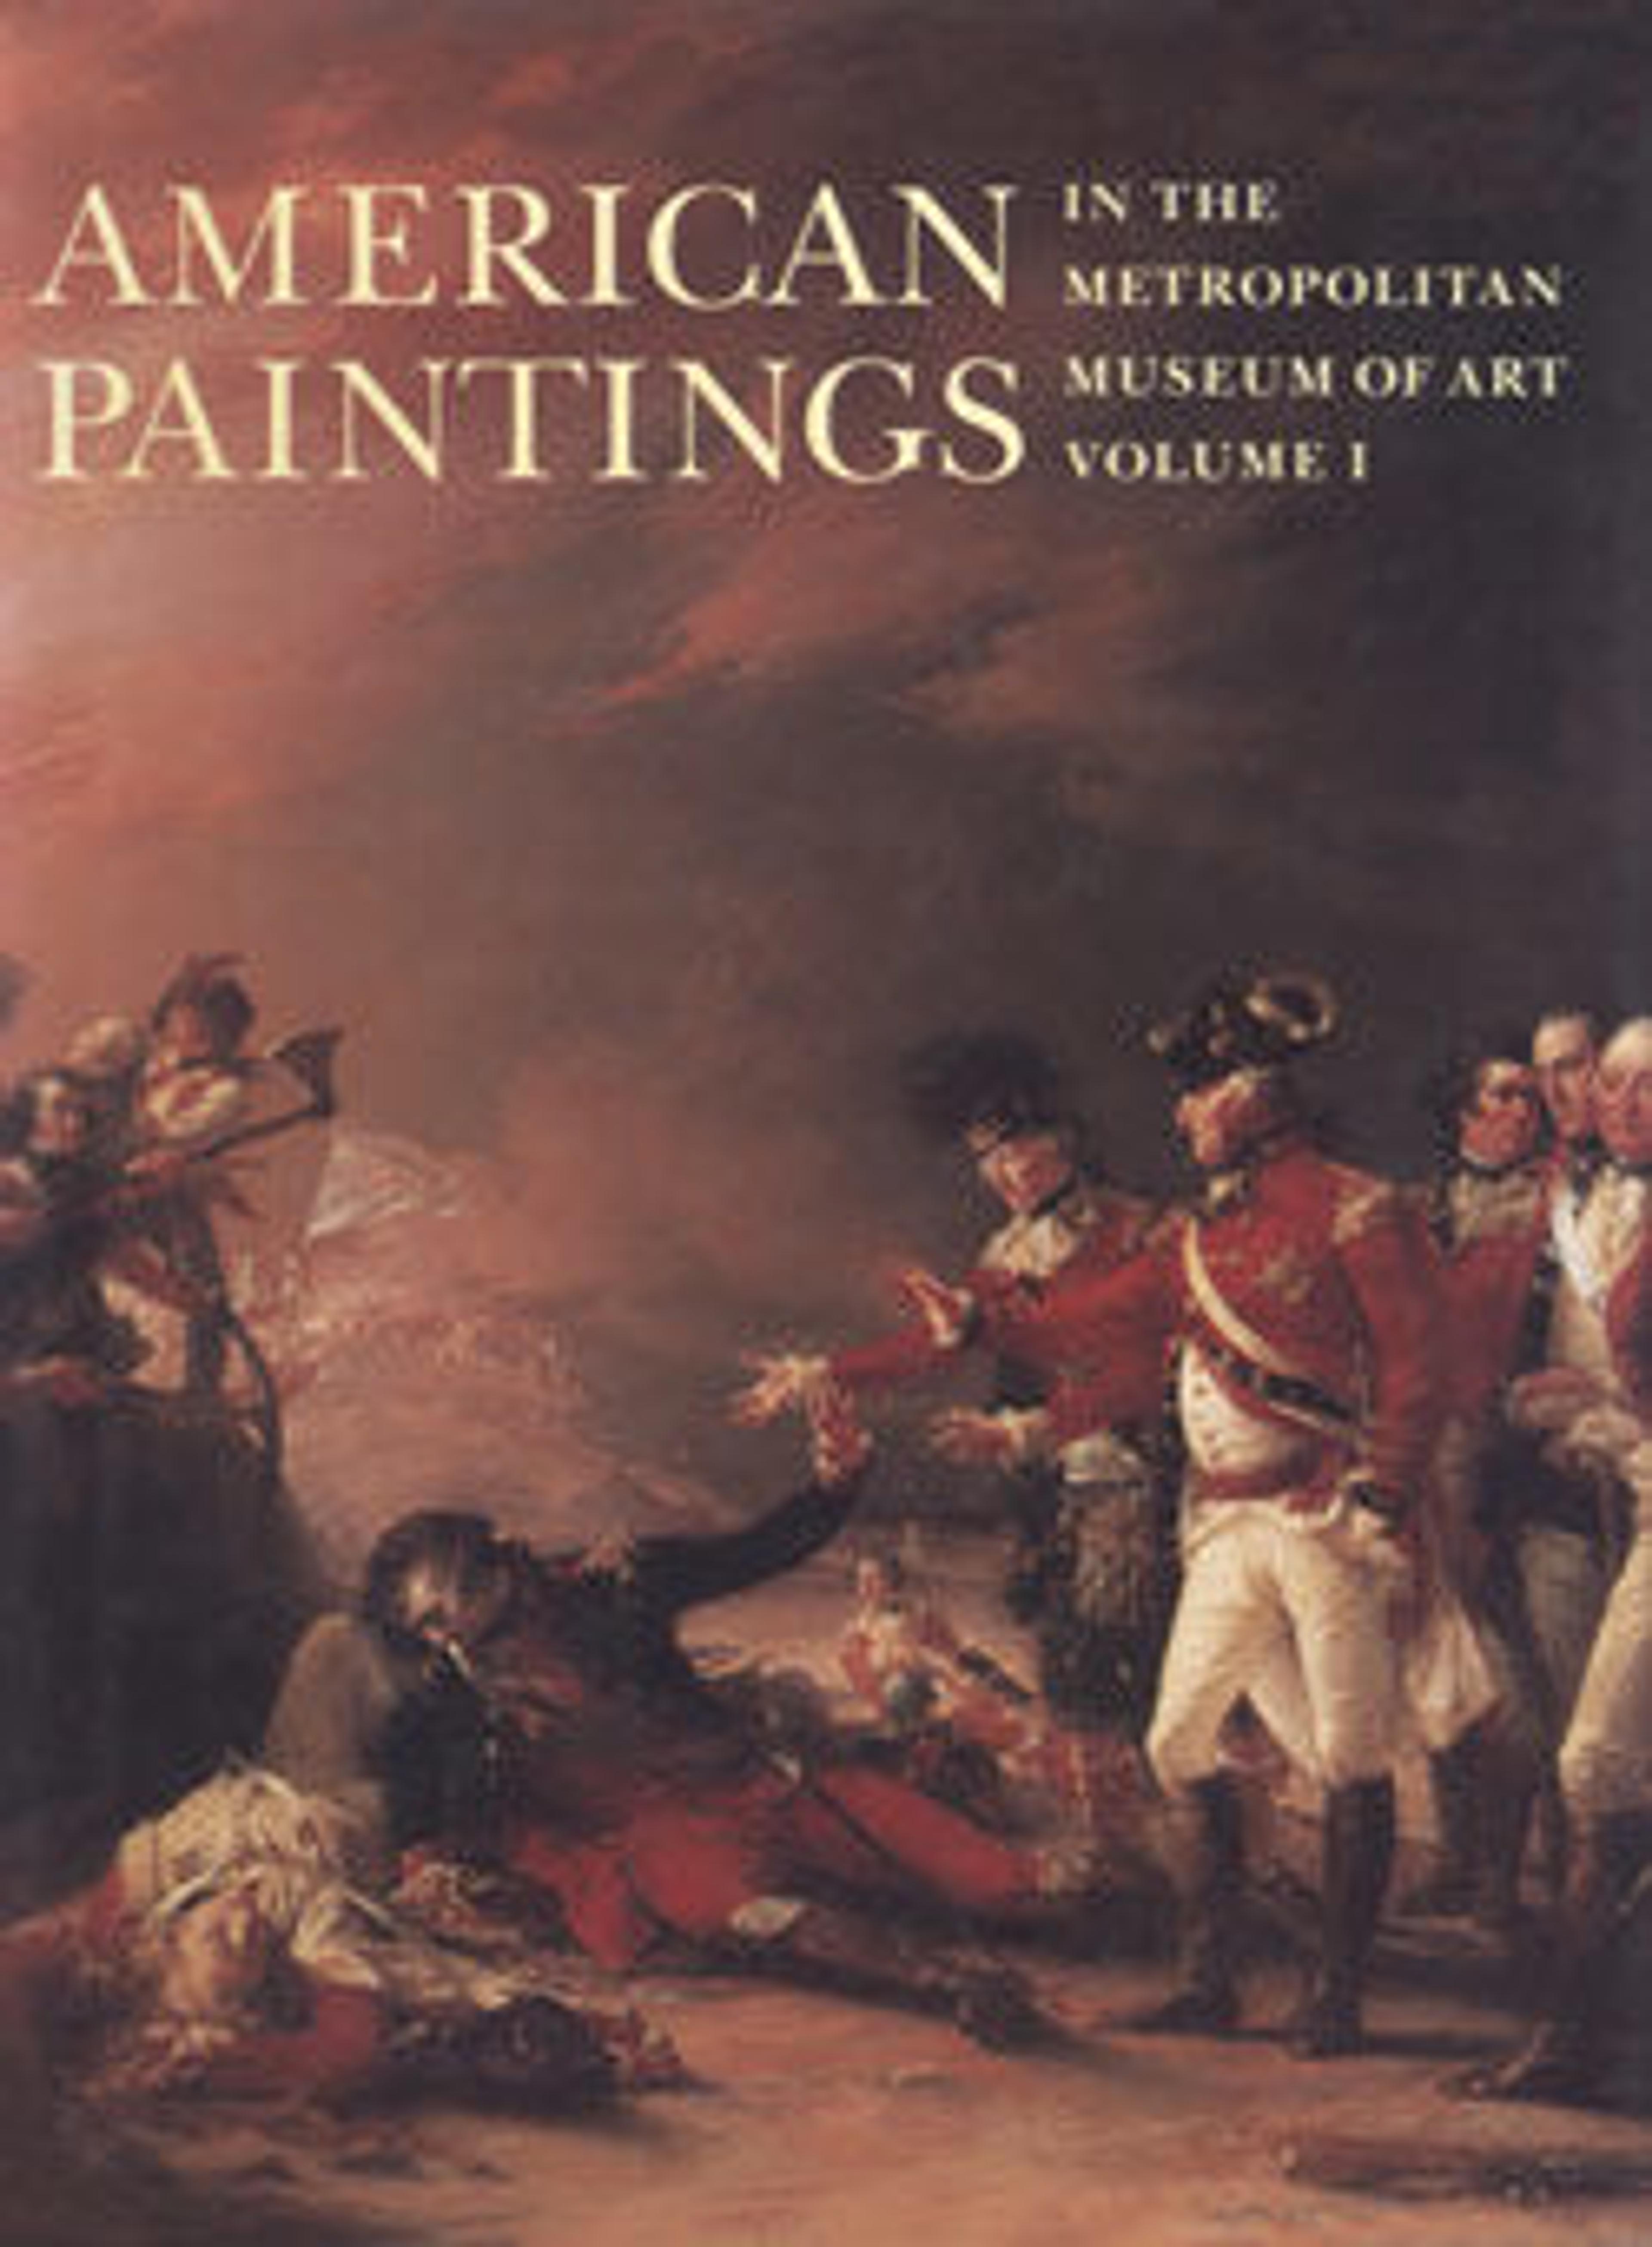 American Paintings in The Metropolitan Museum of Art. Vol. 1, A Catalogue of Works by Artists Born by 1815